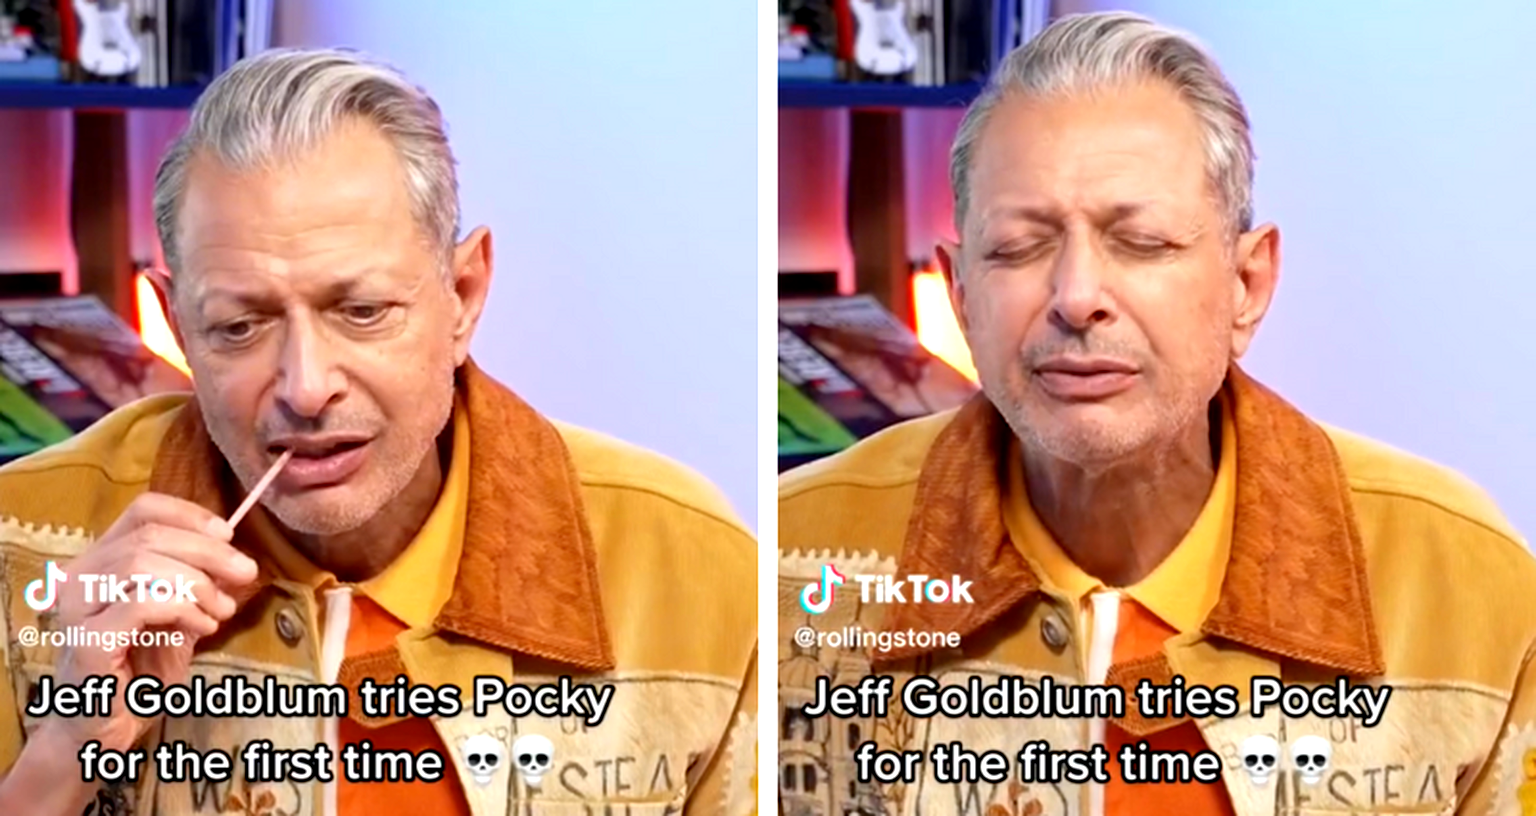 Jeff Goldblum experiences ‘religious ecstasy’ after trying Pocky for first time